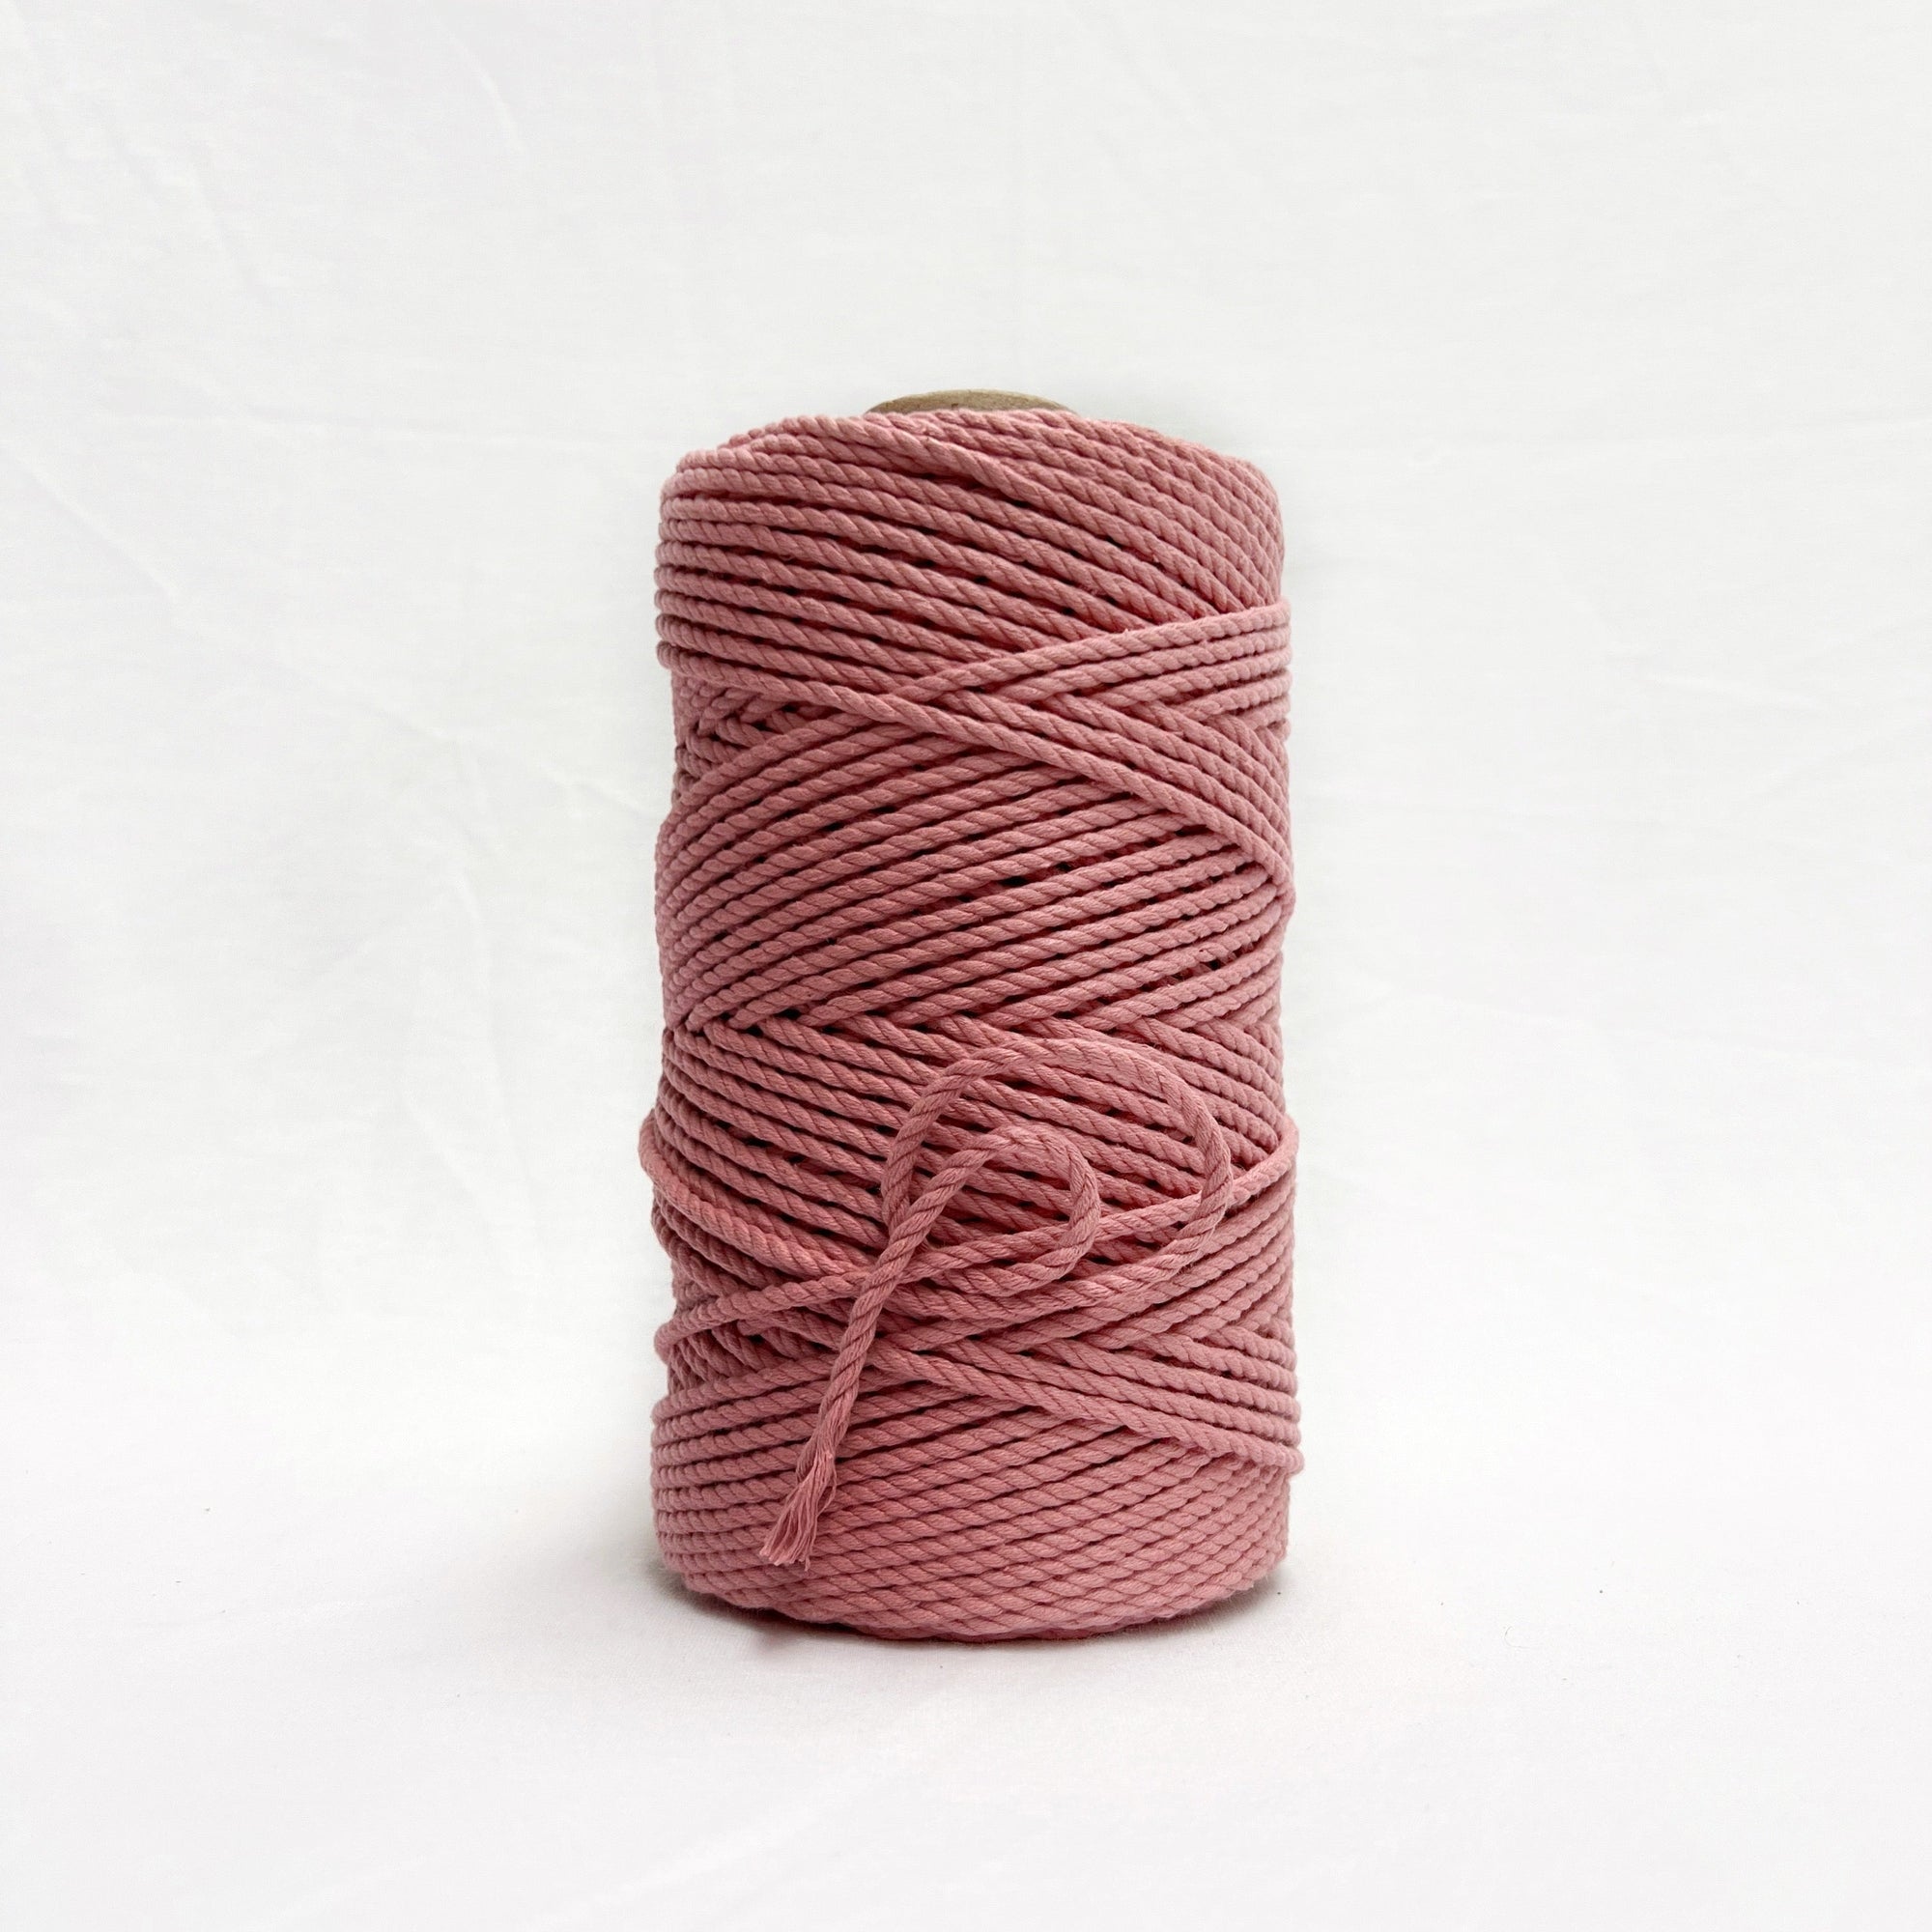 mary maker studio recycled cotton macrame rope in baked blush pink colour suitable for macrame workshops beginners and advanced artists